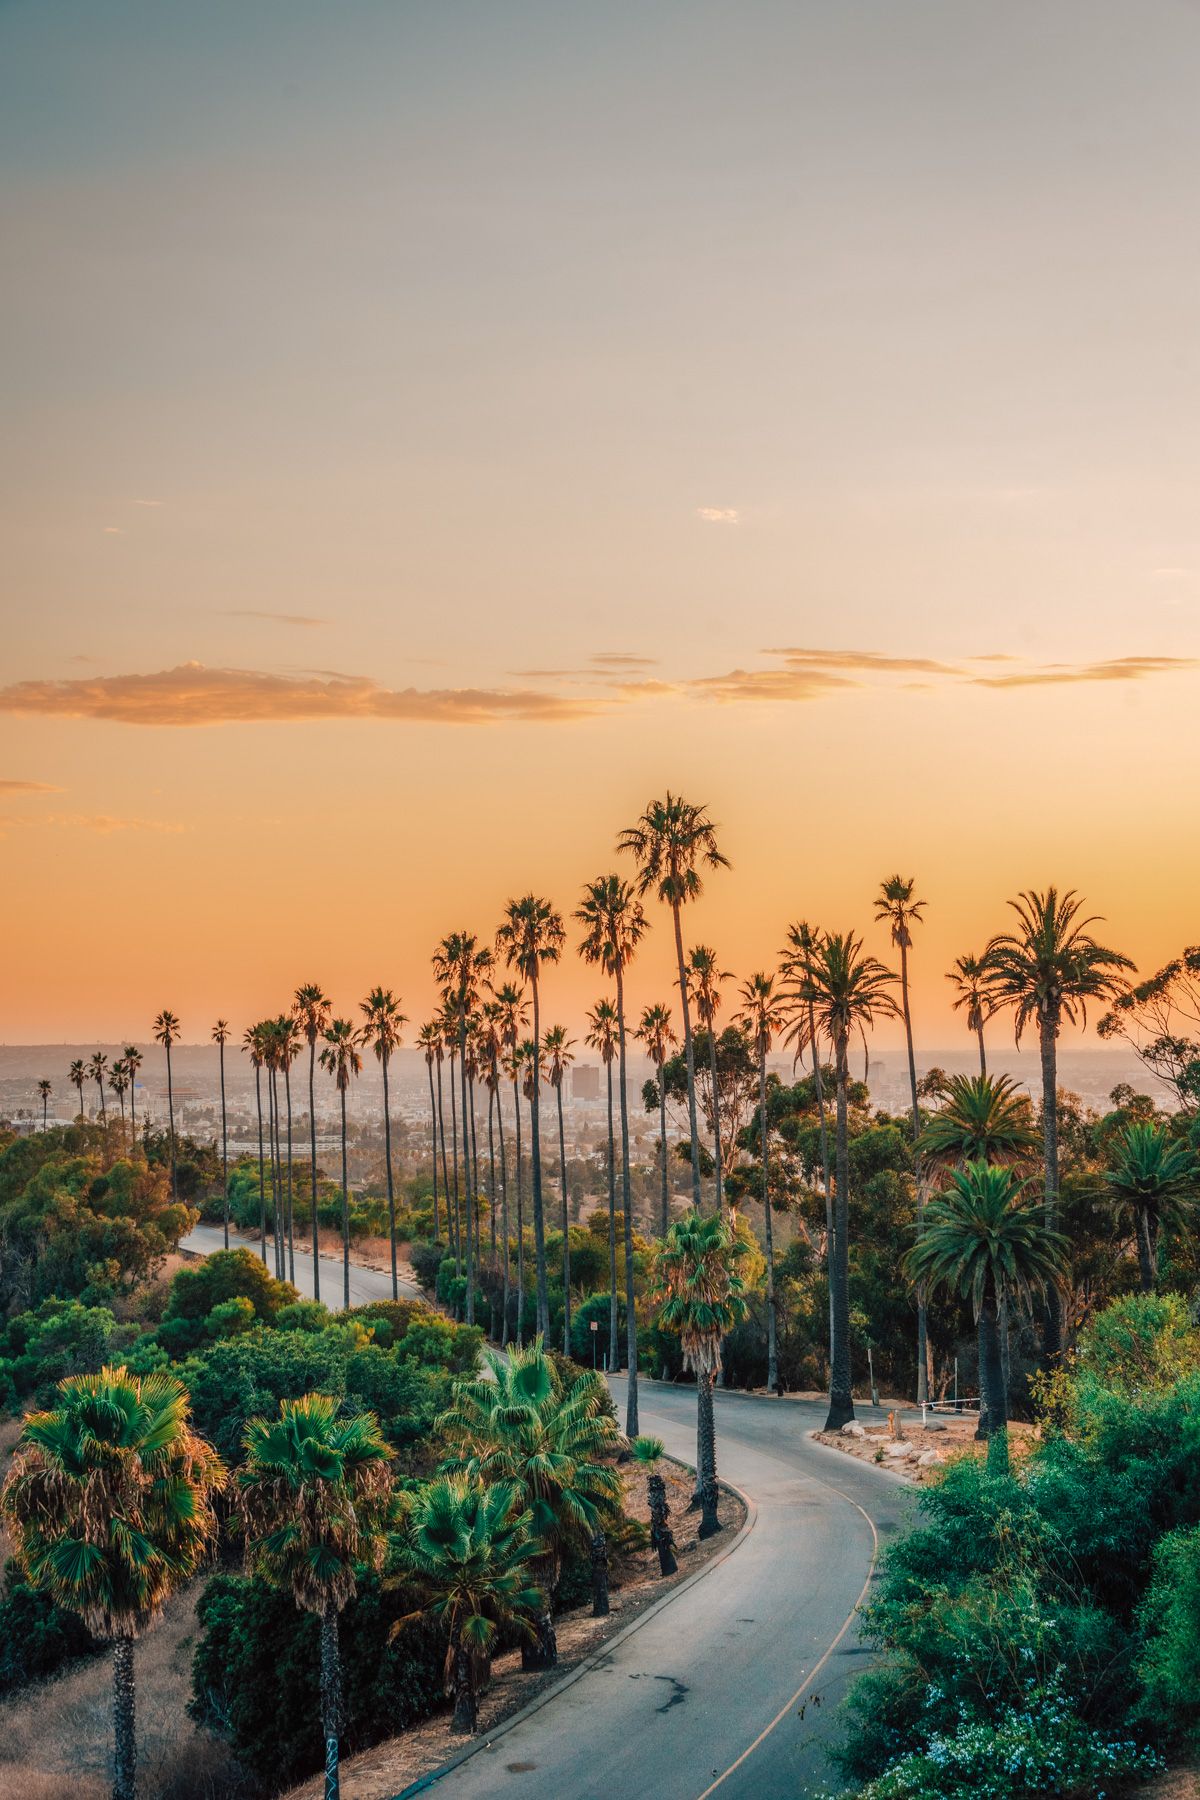 A scenic palm tree-lined street with the hazy city in the distance and and orange sunset sky.